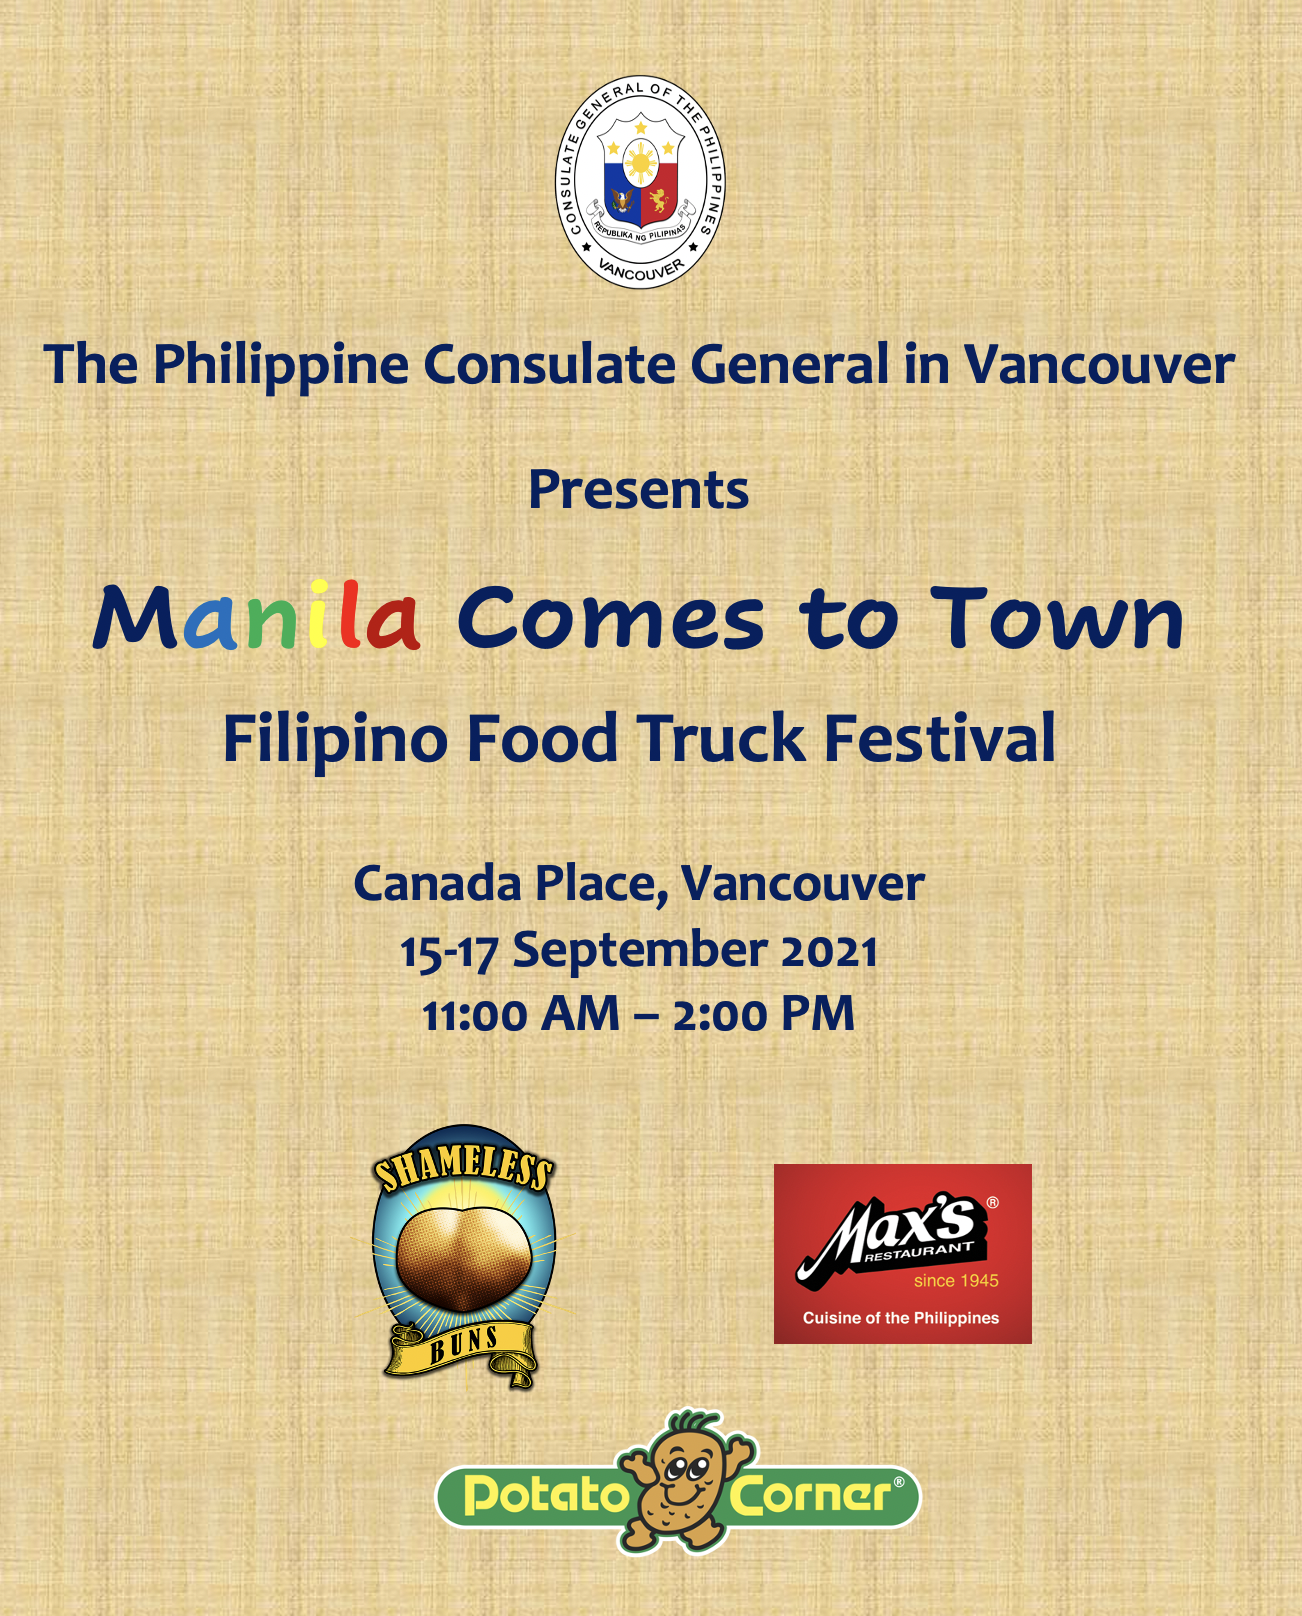 MANILA COMES TO TOWN - Vancouver Philippines Consulate General